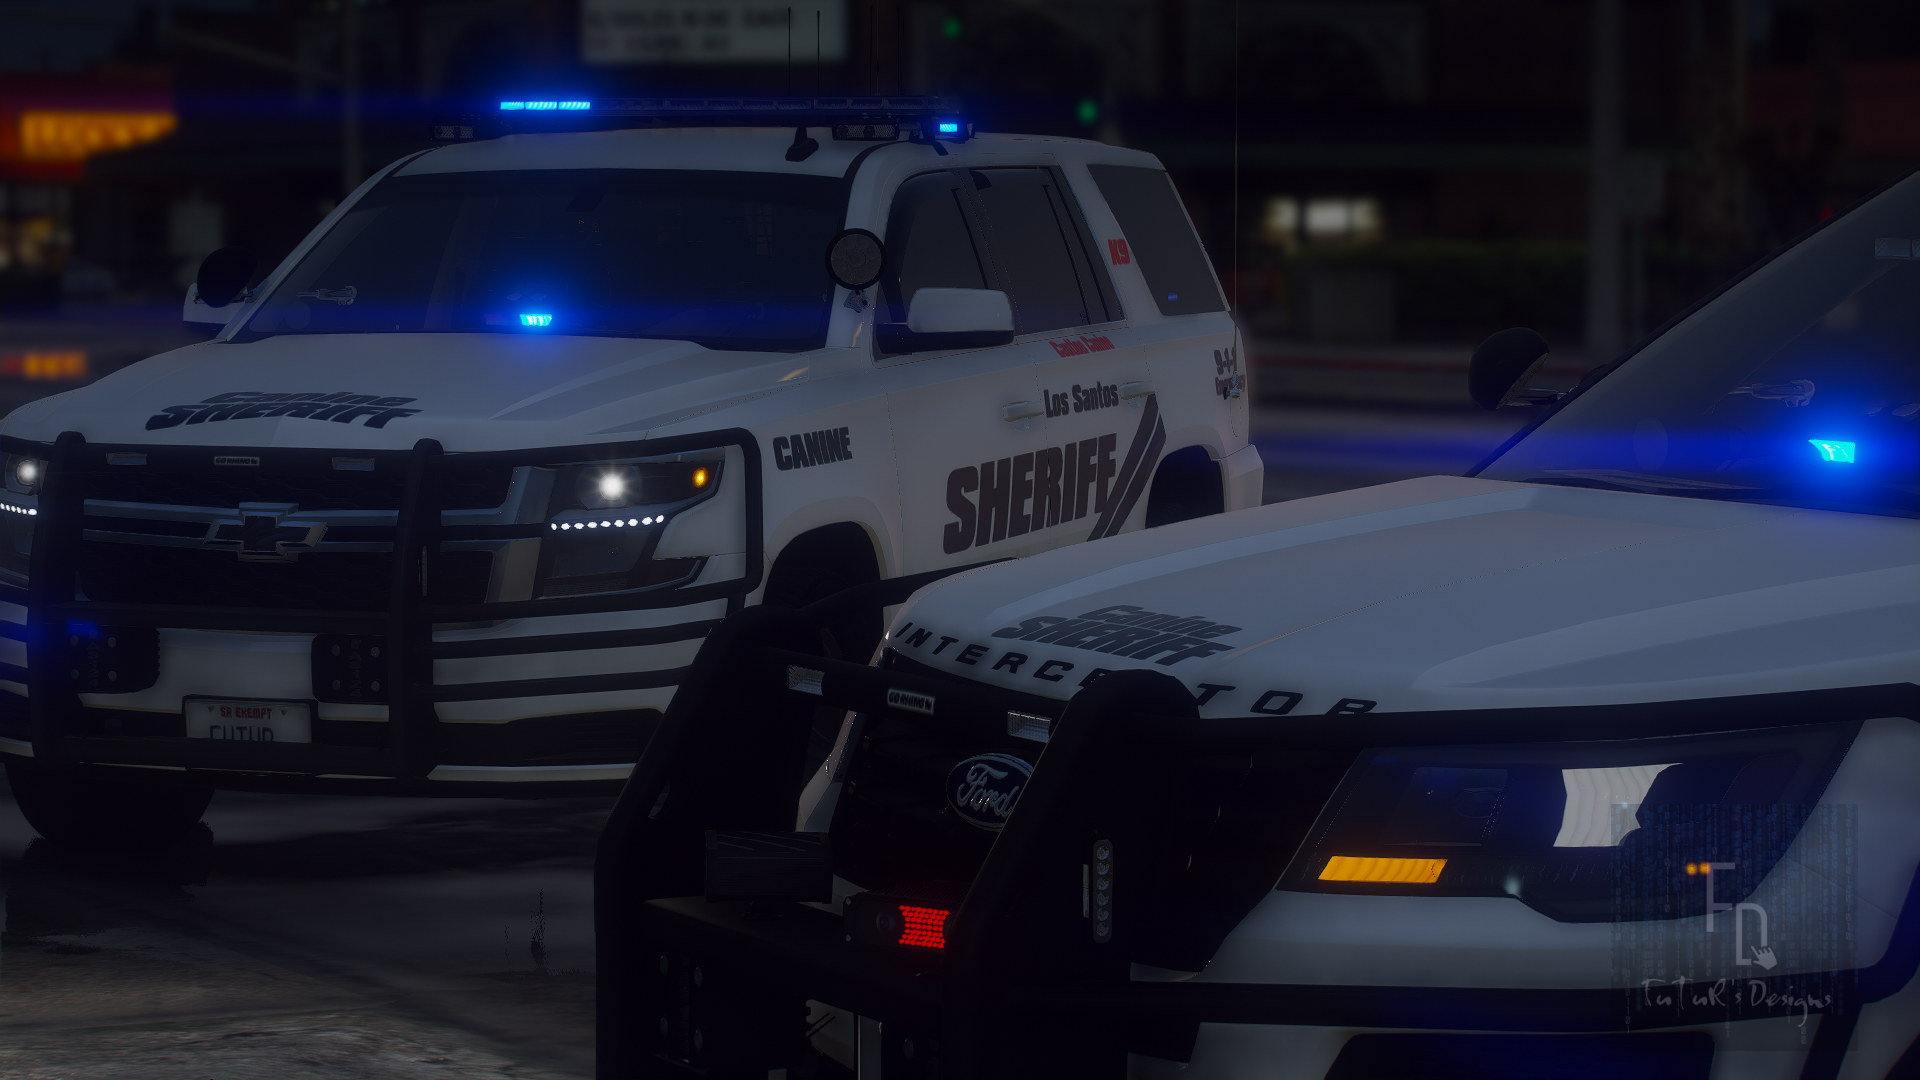 Grand_Theft_Auto_V_12_09_2021_21_18_14.png